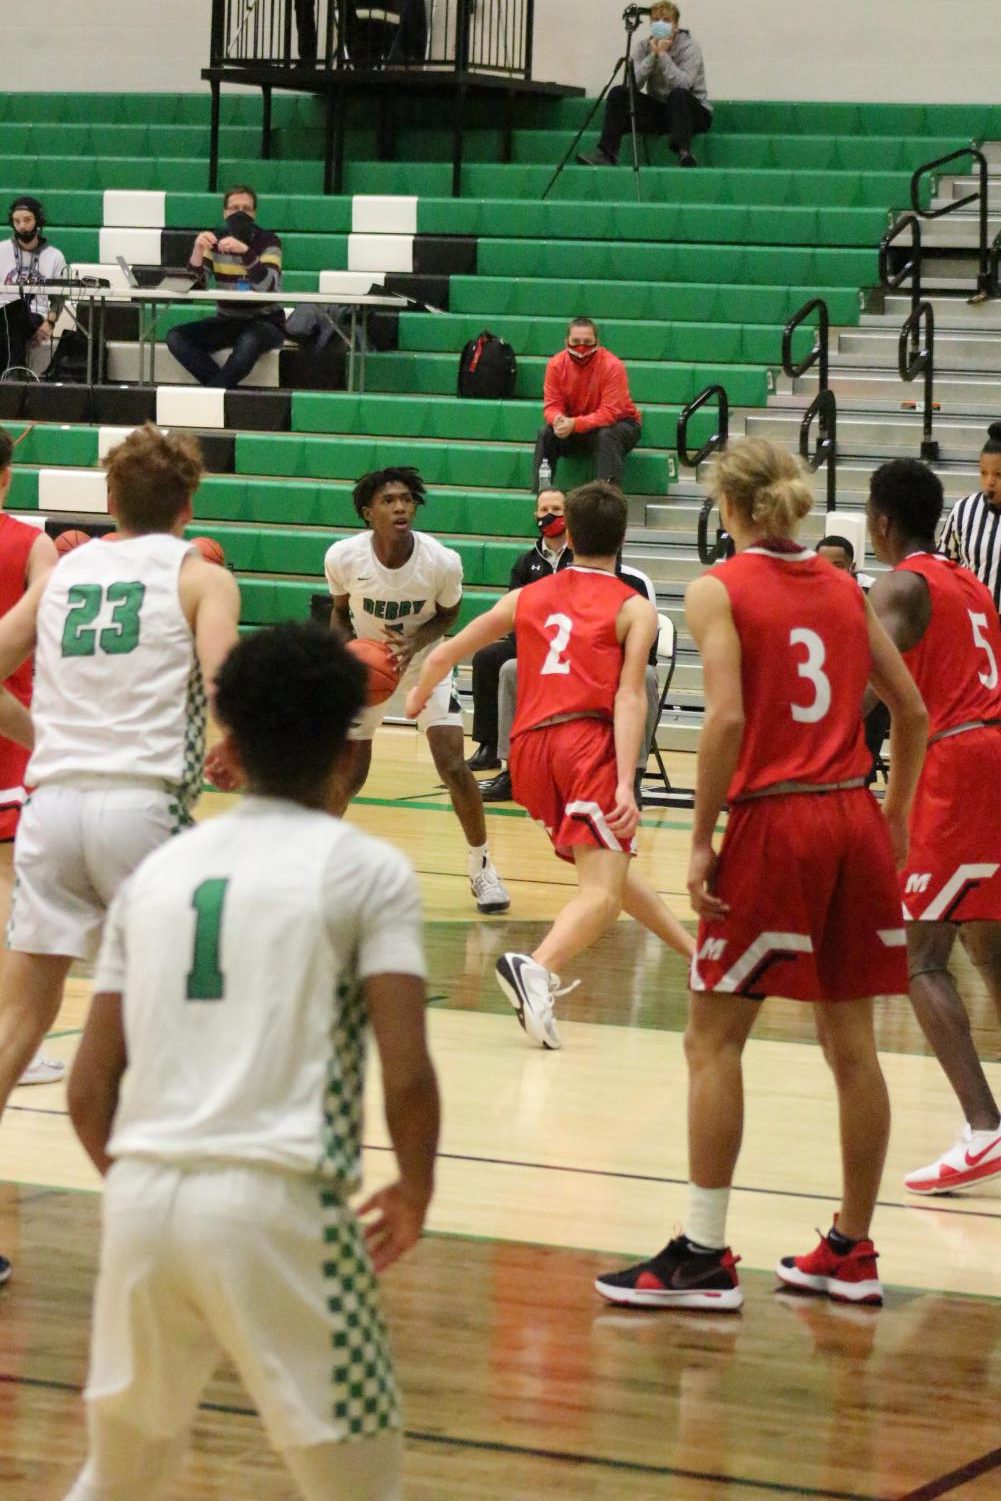 Boys+basketball+vs.+Maize+%28Photos+by+Janeah+Berry%29